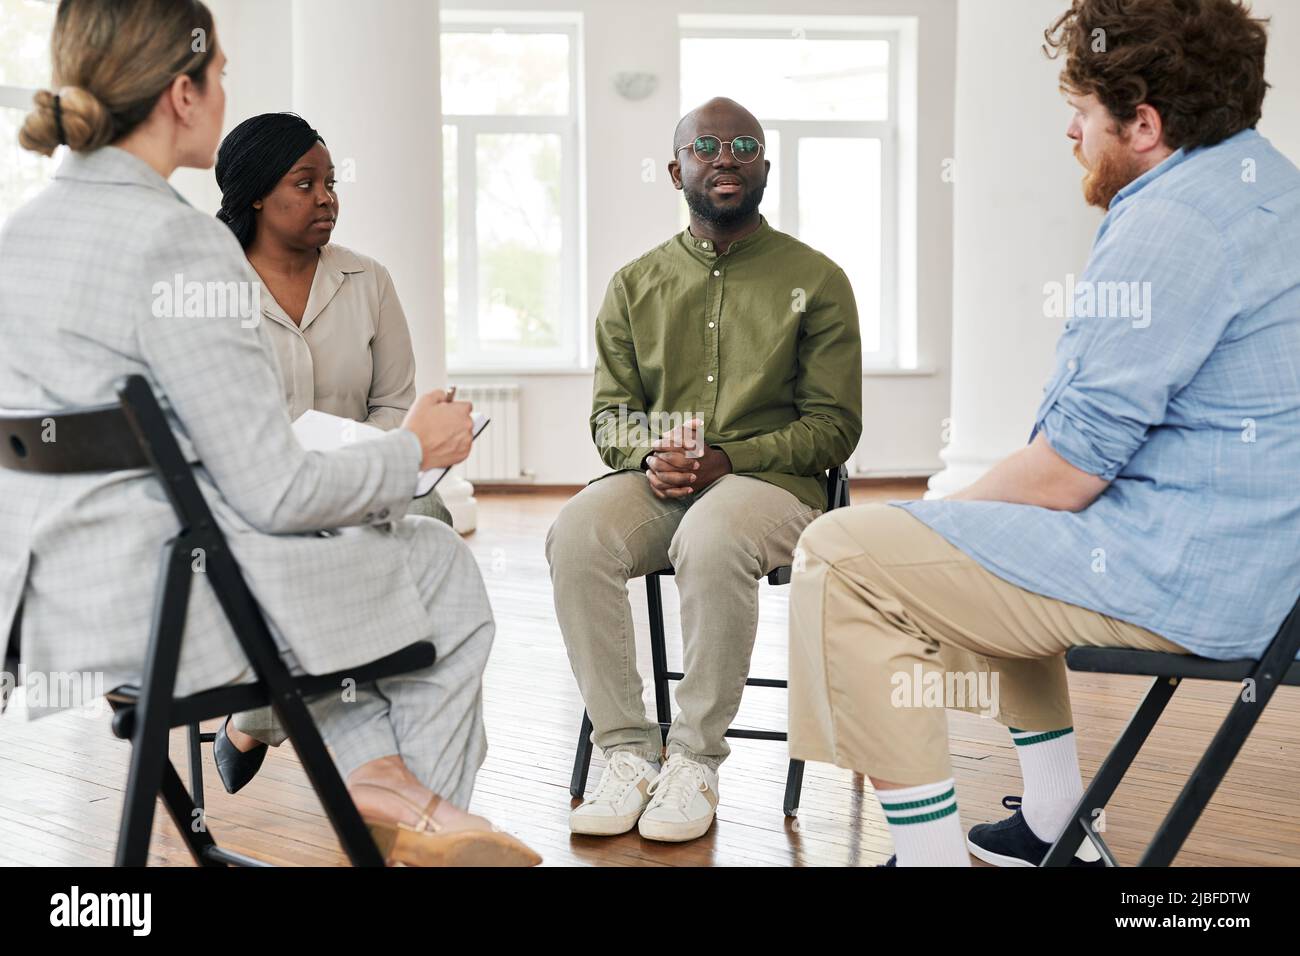 One of interracial patients describing his problem to psychologist and other people while sitting among them during session in office Stock Photo